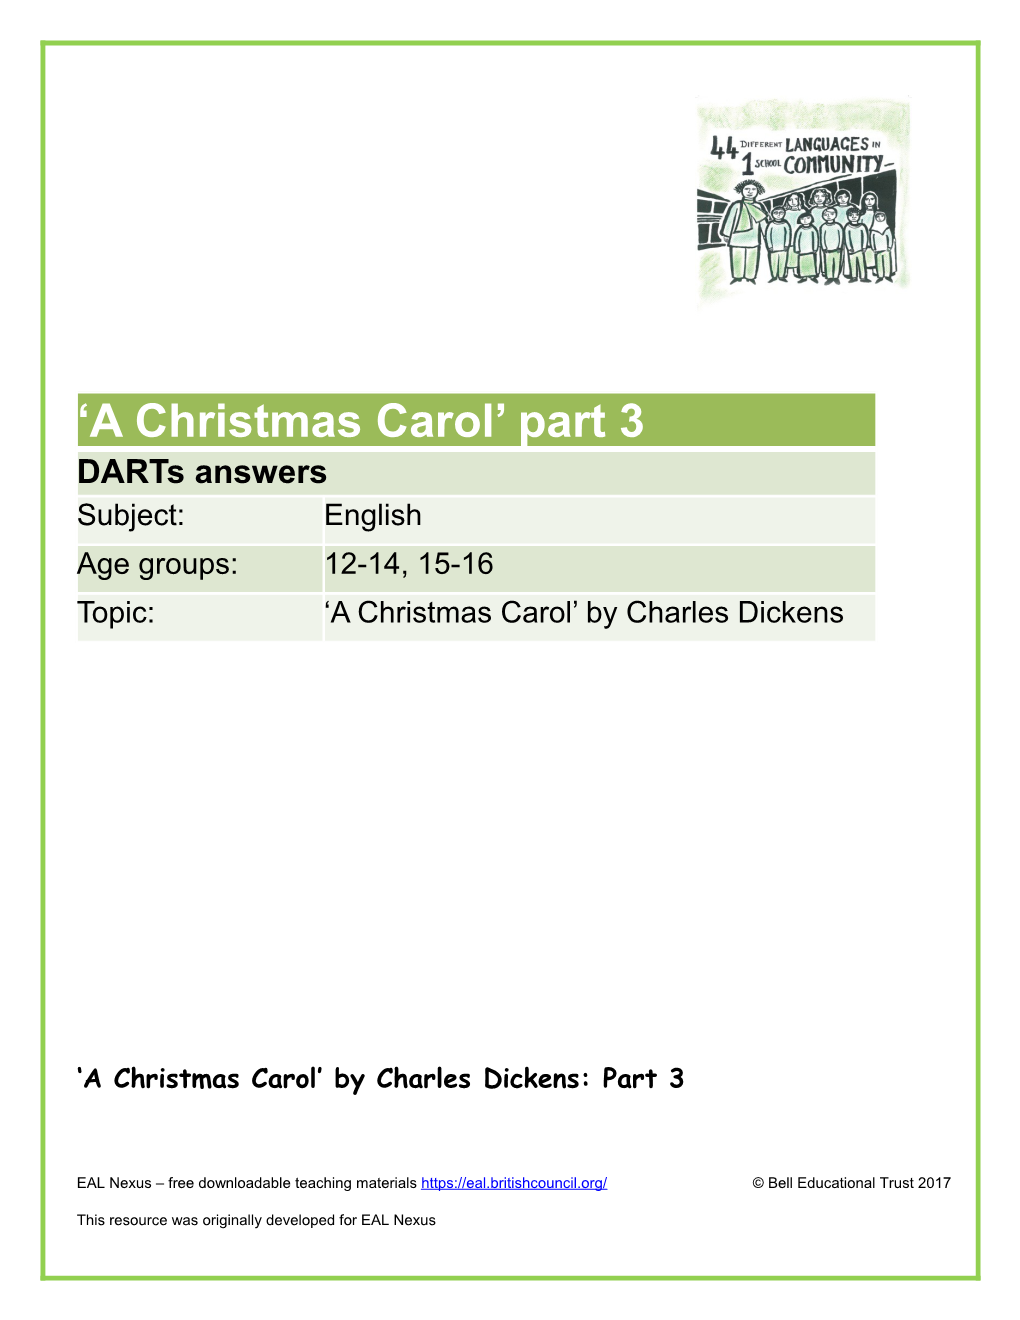 A Christmas Carol by Charles Dickens: Part3